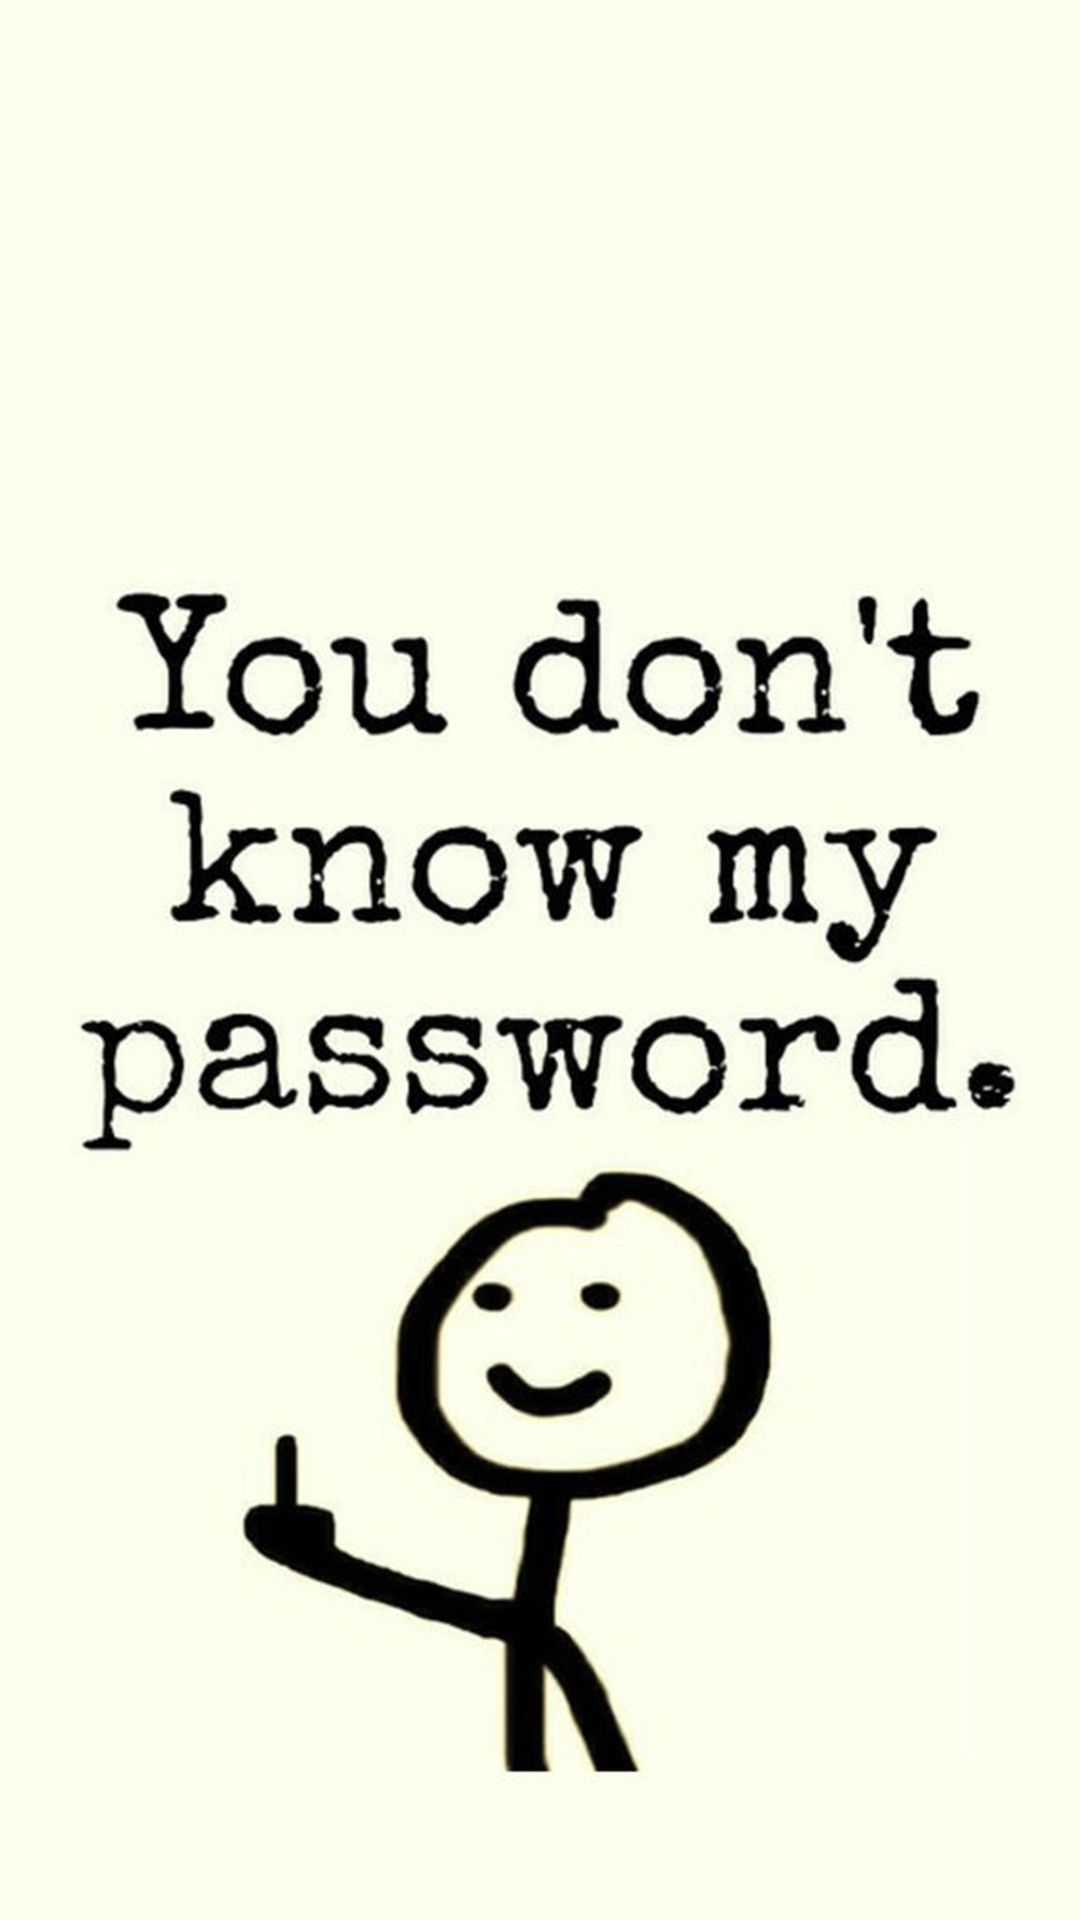 you don't know my password wallpapers - wallpaper cave